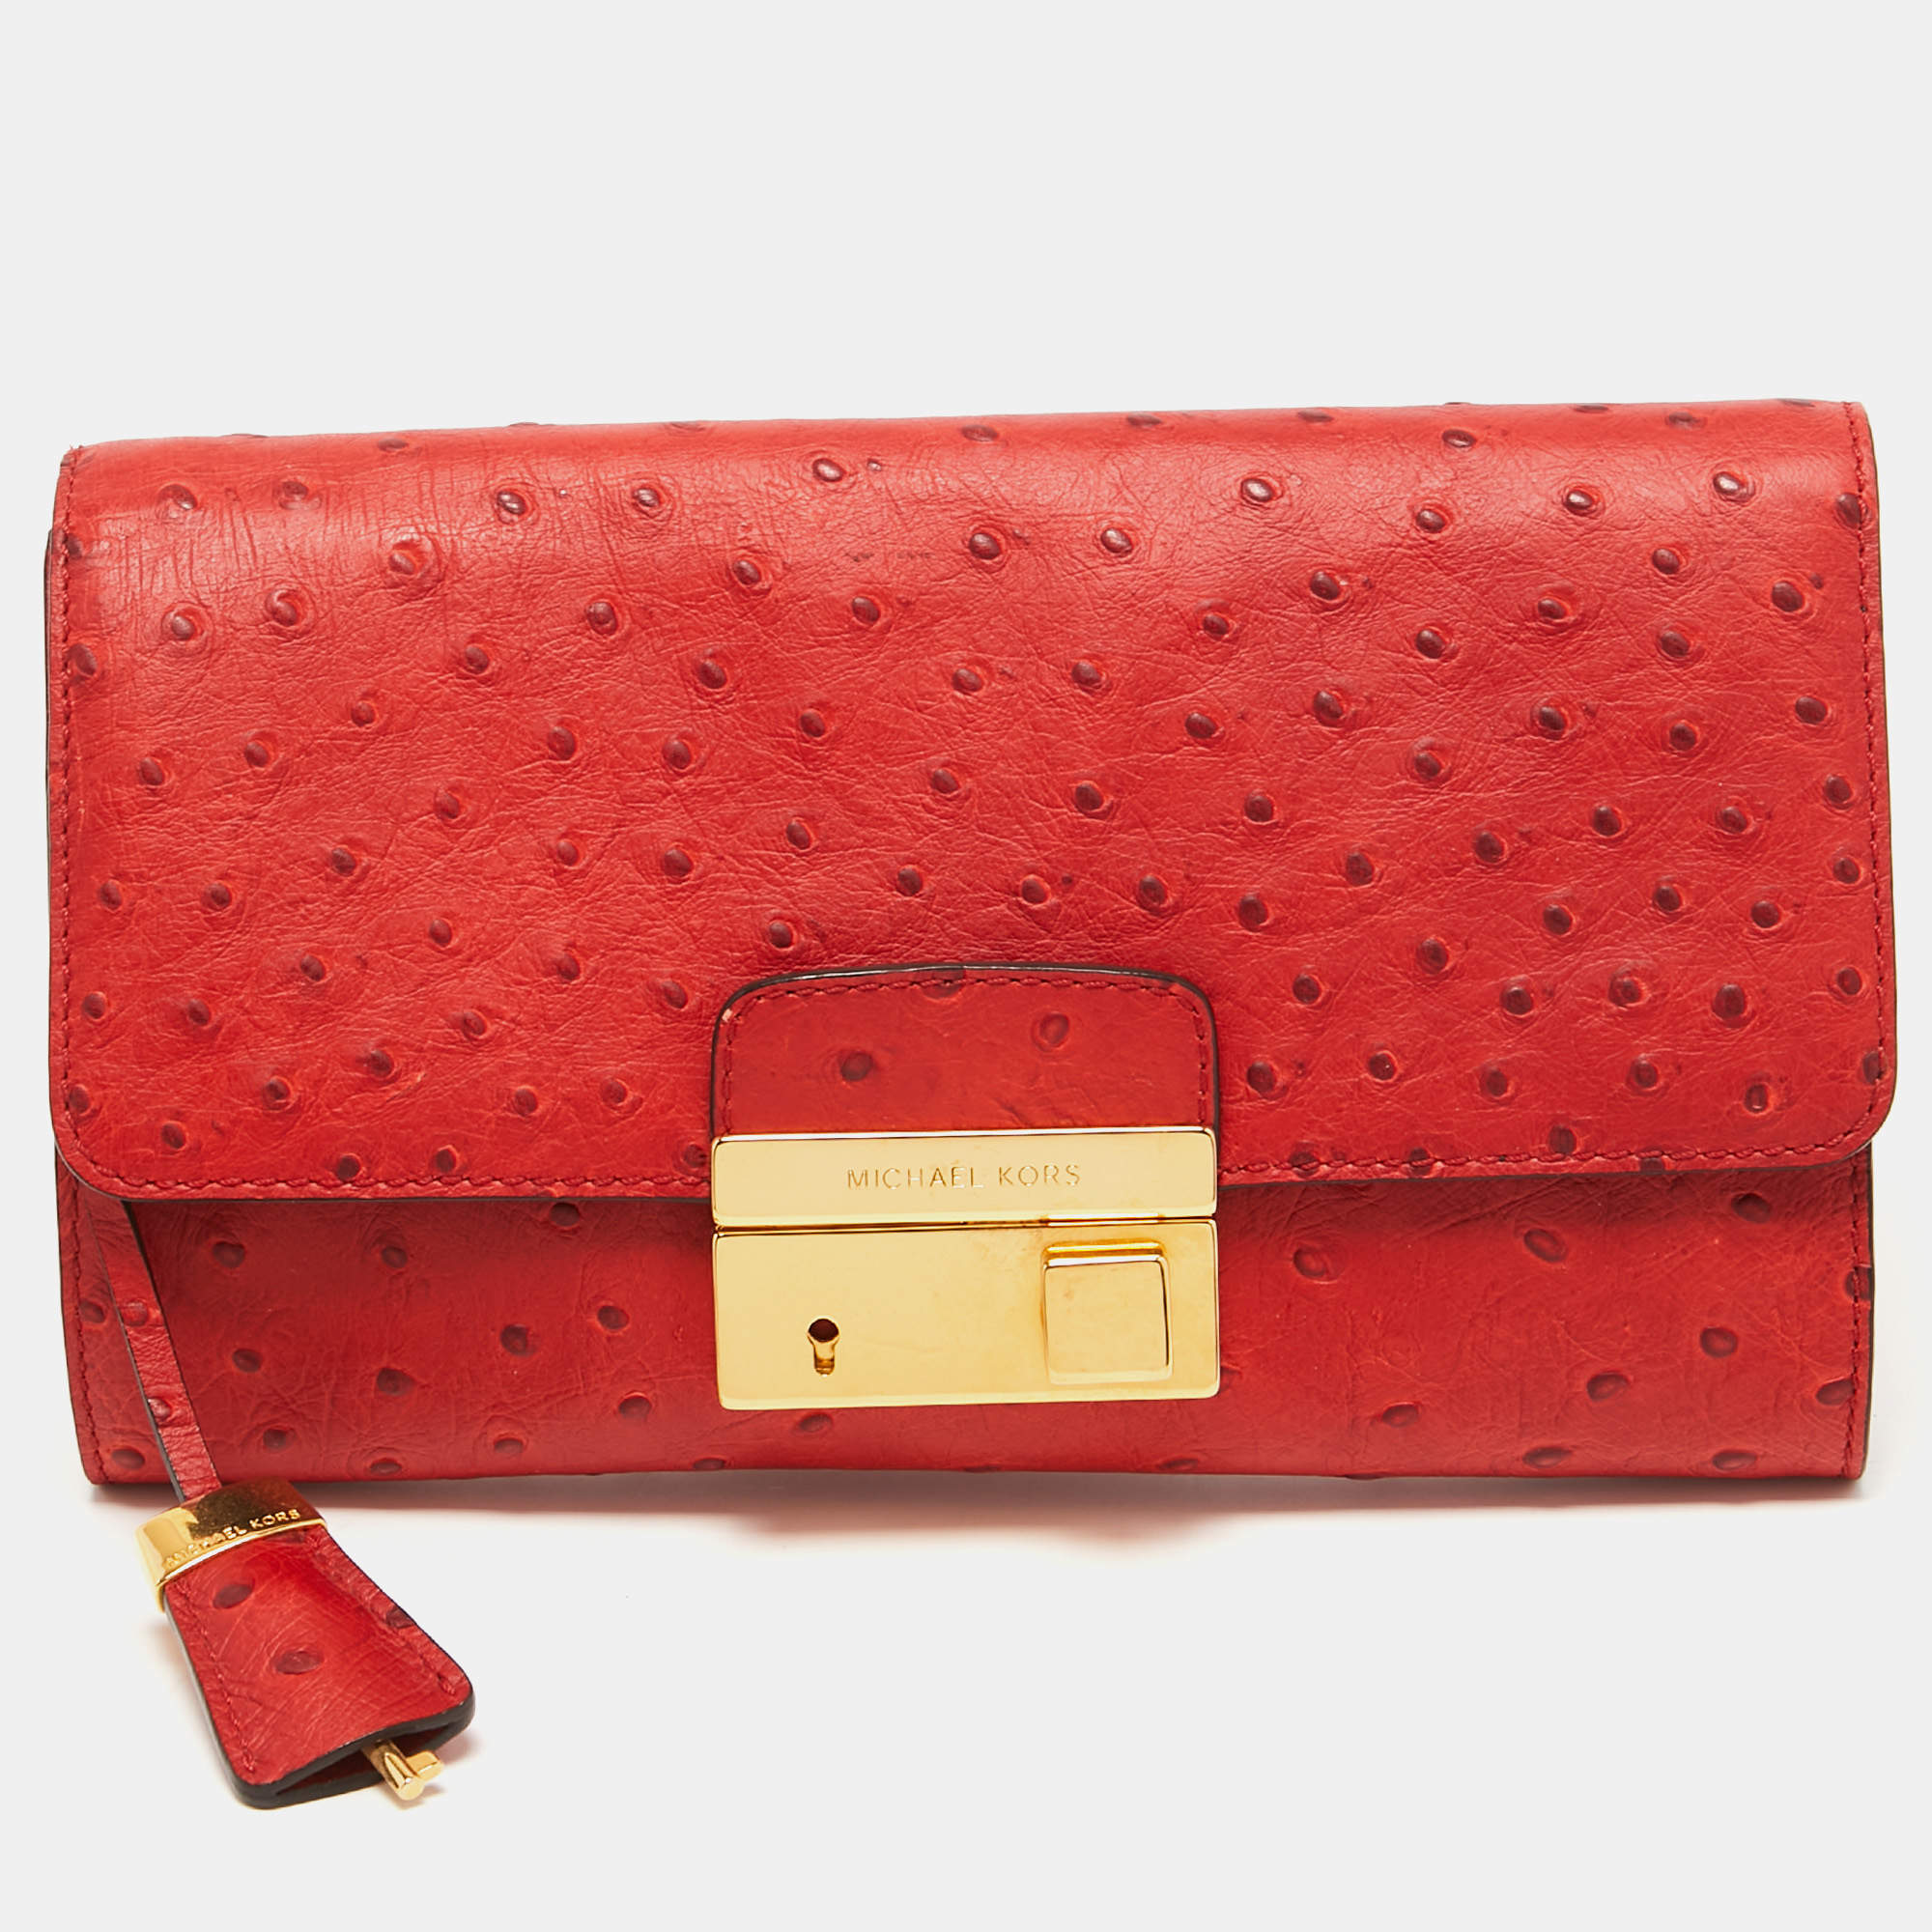 Top 98+ imagen michael kors red purse with gold chain - Thptnganamst.edu.vn